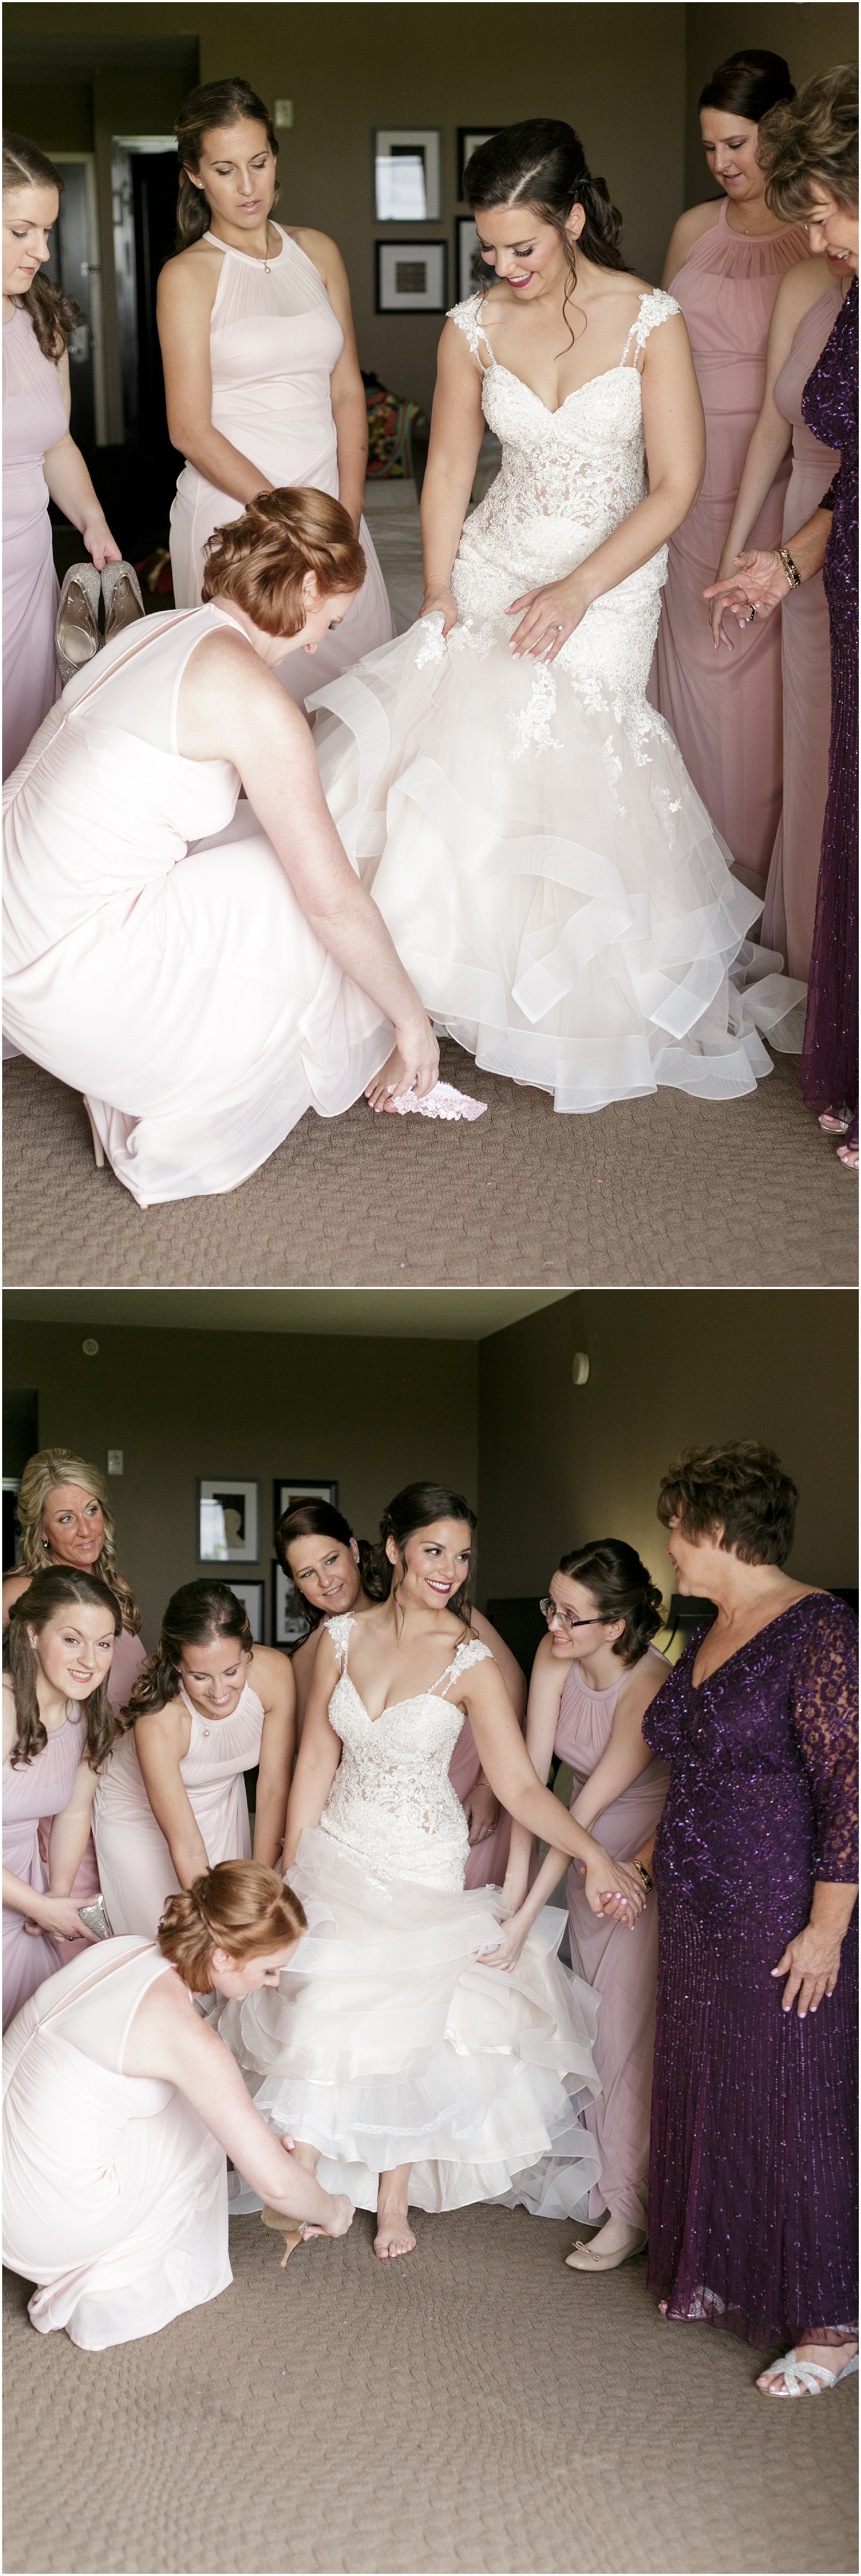 Bridesmaids helping the bride put on her shoes. 